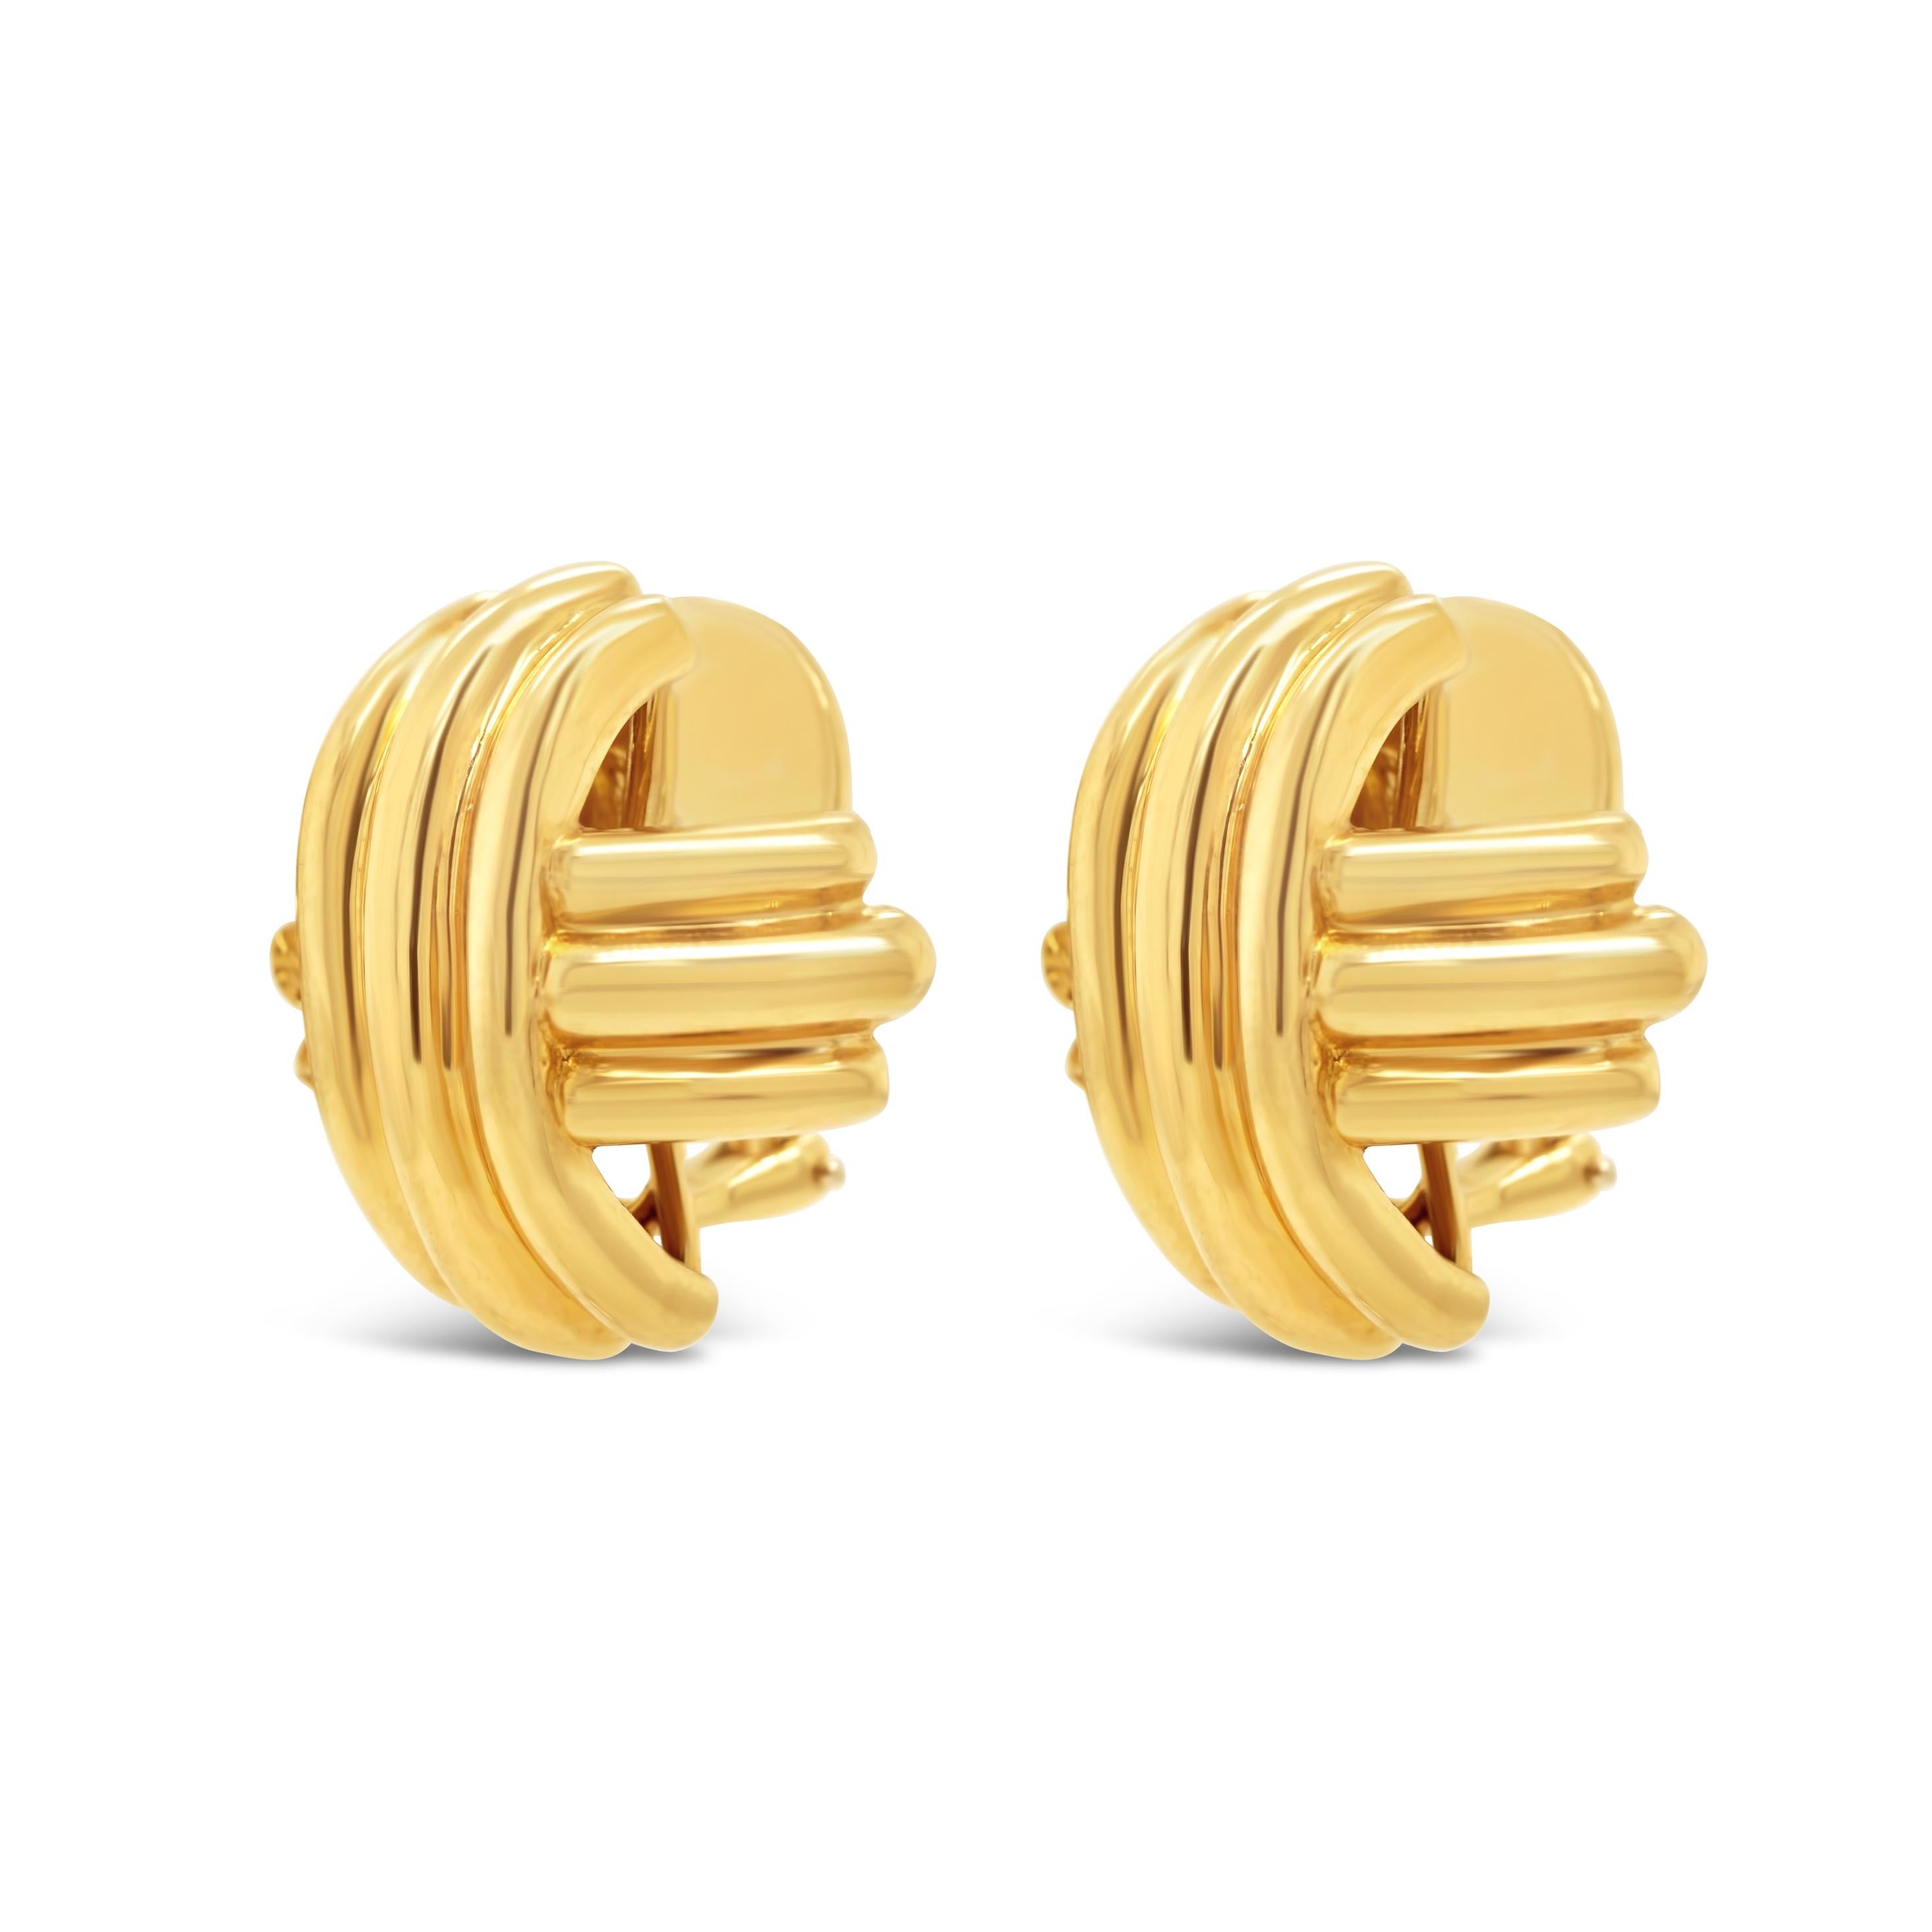 Material: 18ct Yellow Gold 
Earring Height/Width: 24mm
Total Weight: 24.3g
Each earring is stamped T&Co. 750

These earrings are pre-owned but in excellent condition and sanitised. Earrings include a Luxury Portal Presentation Box. 

Gemstones : All